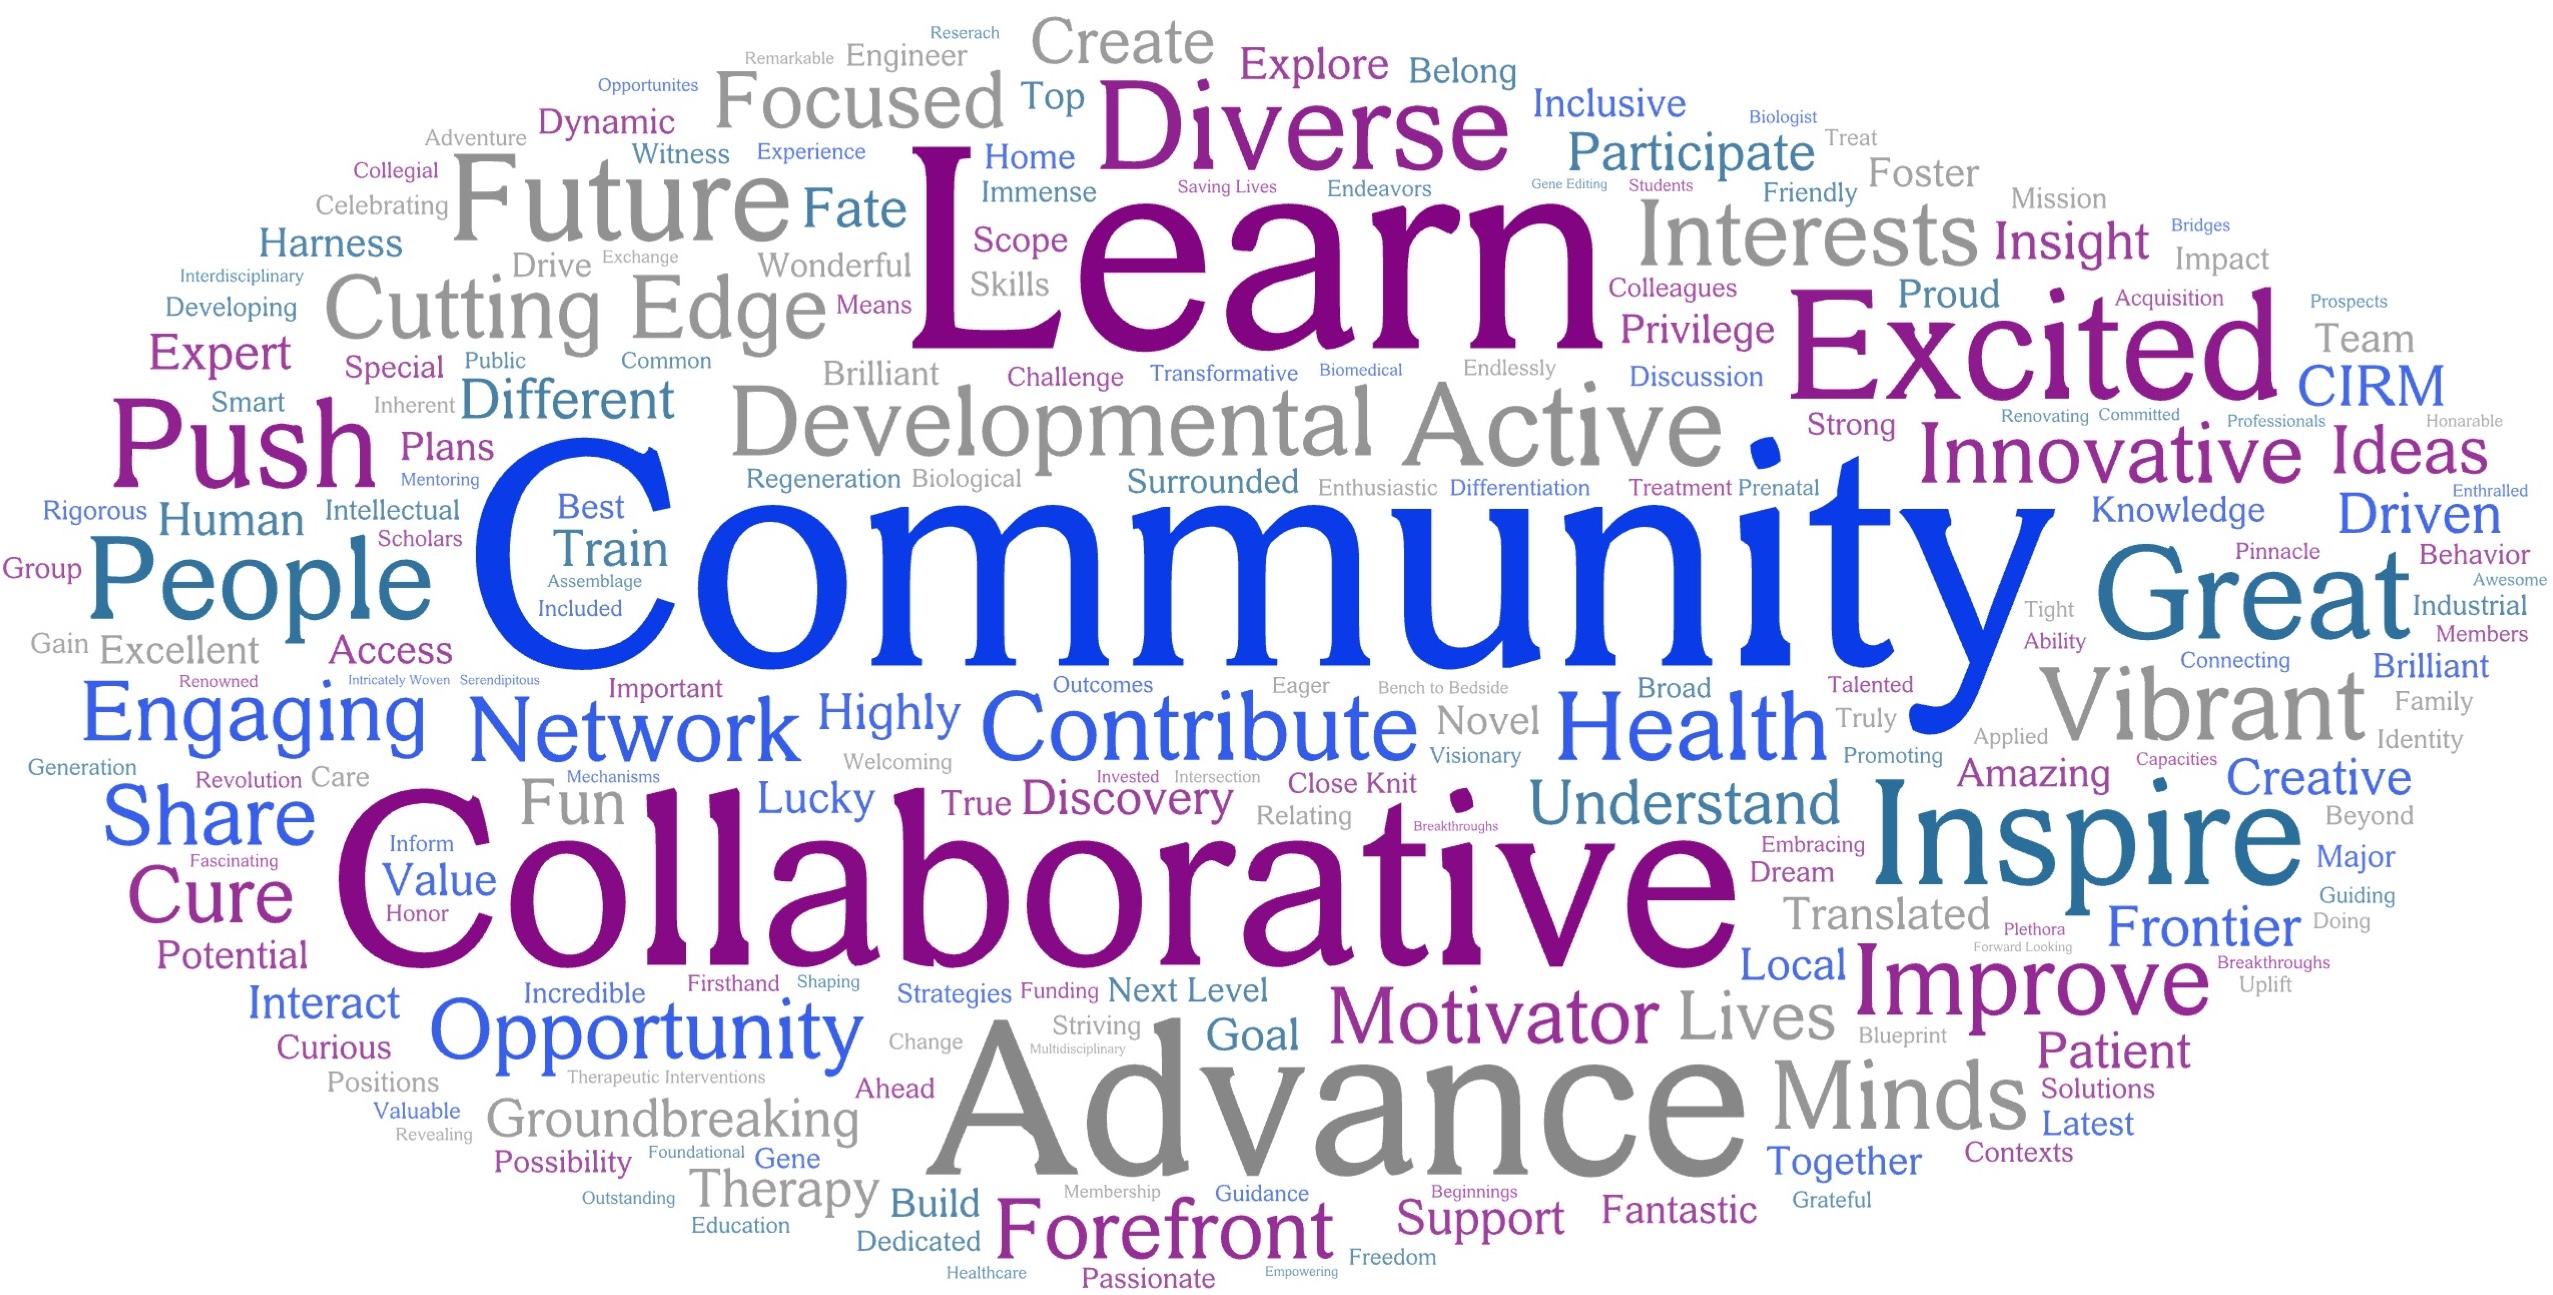 This word cloud captures the diverse and vibrant responses to "what does the Broad Stem Cell Center mean to you?" Key themes include a strong sense of community, collaboration, and the drive to advance cutting-edge research. Words like "community," "collaborative," "learn," "excited," "innovative," and "inspire" stand out prominently, highlighting the center's focus on fostering a supportive and innovative environment.